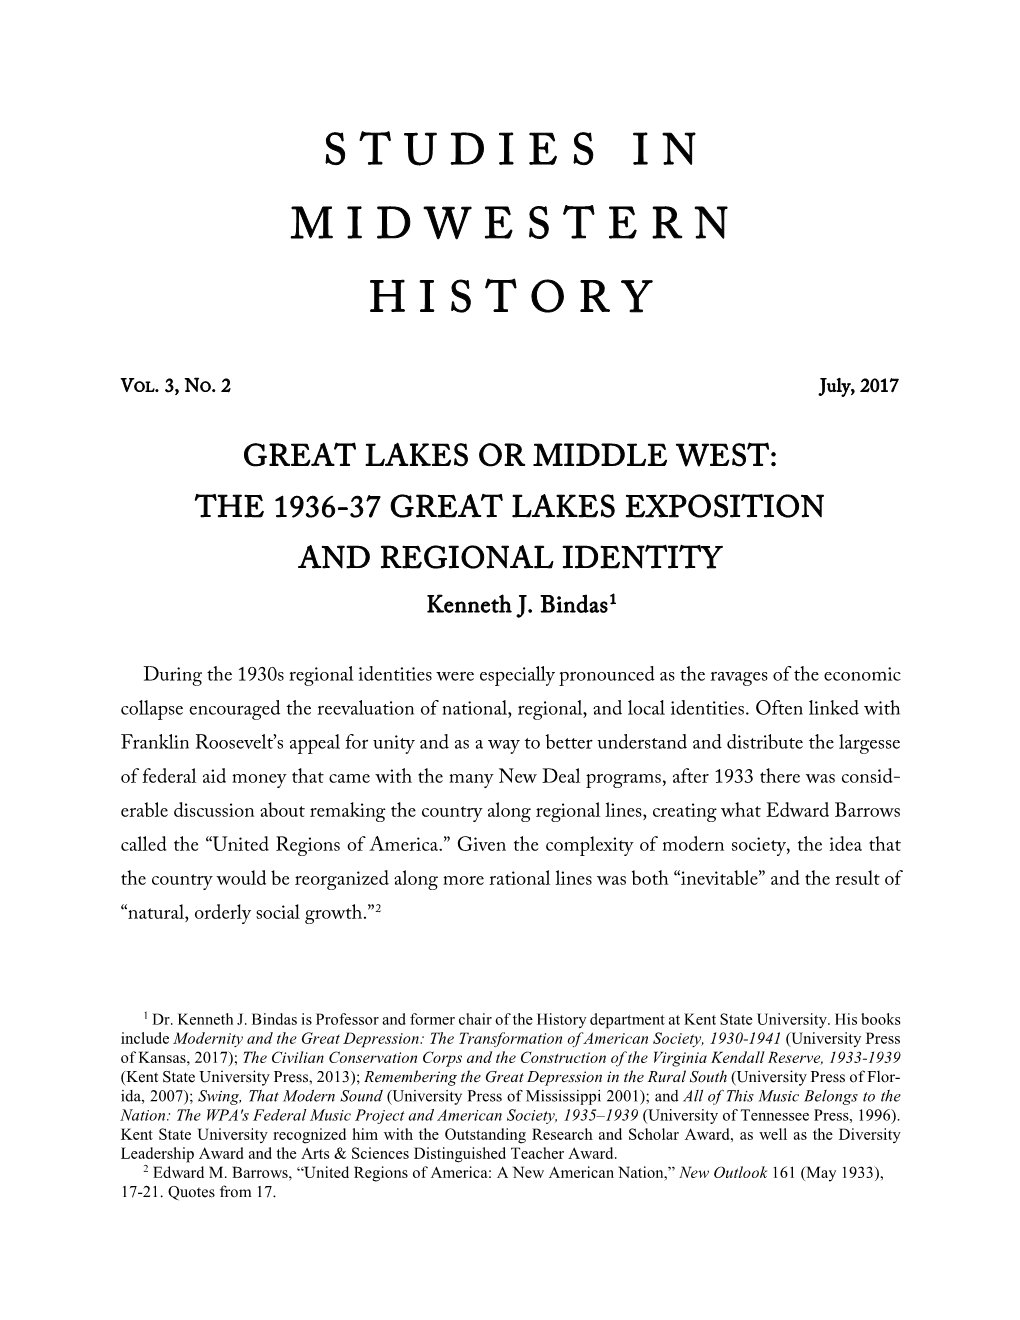 GREAT LAKES OR MIDDLE WEST: the 1936-37 GREAT LAKES EXPOSITION and REGIONAL IDENTITY Kenneth J